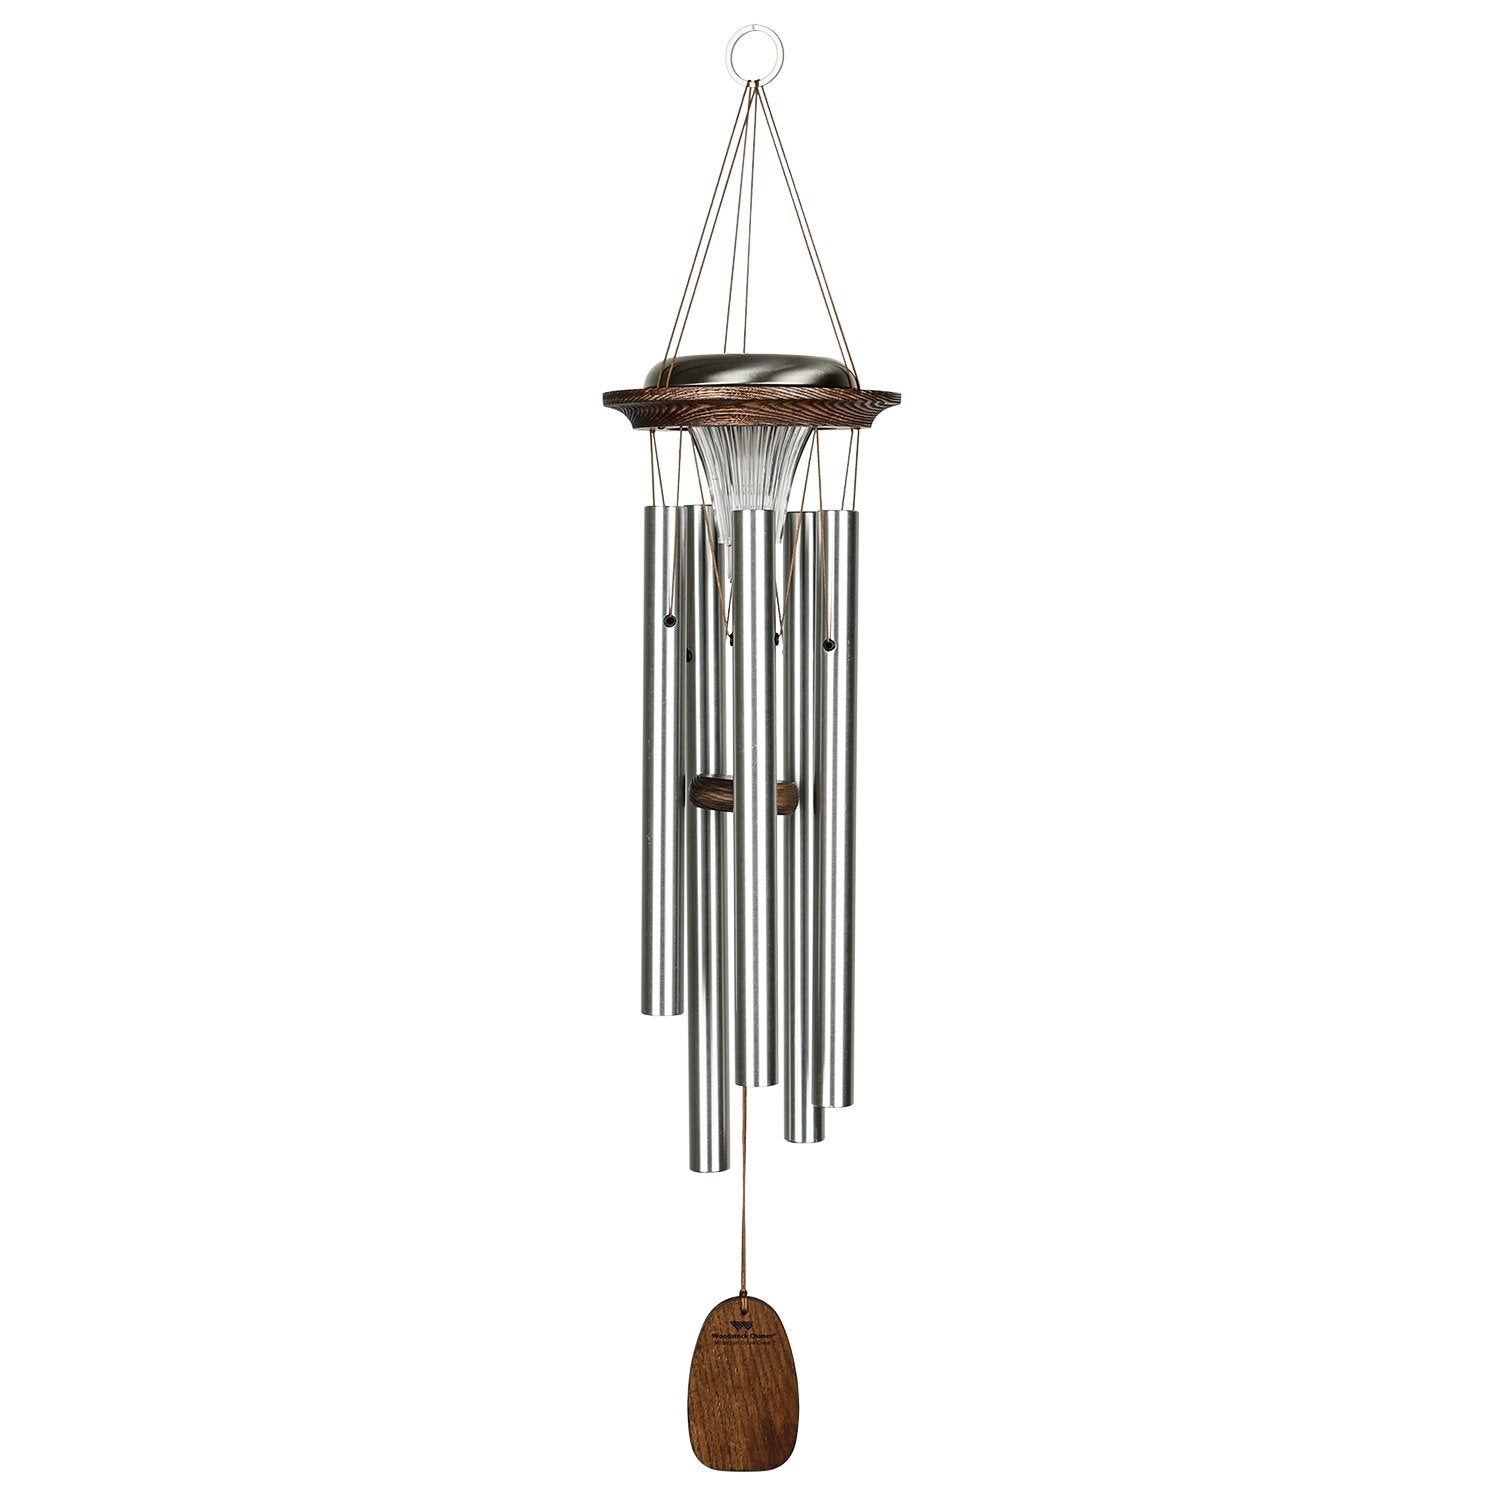 Moonlight Solar Chimes - Silver full product image